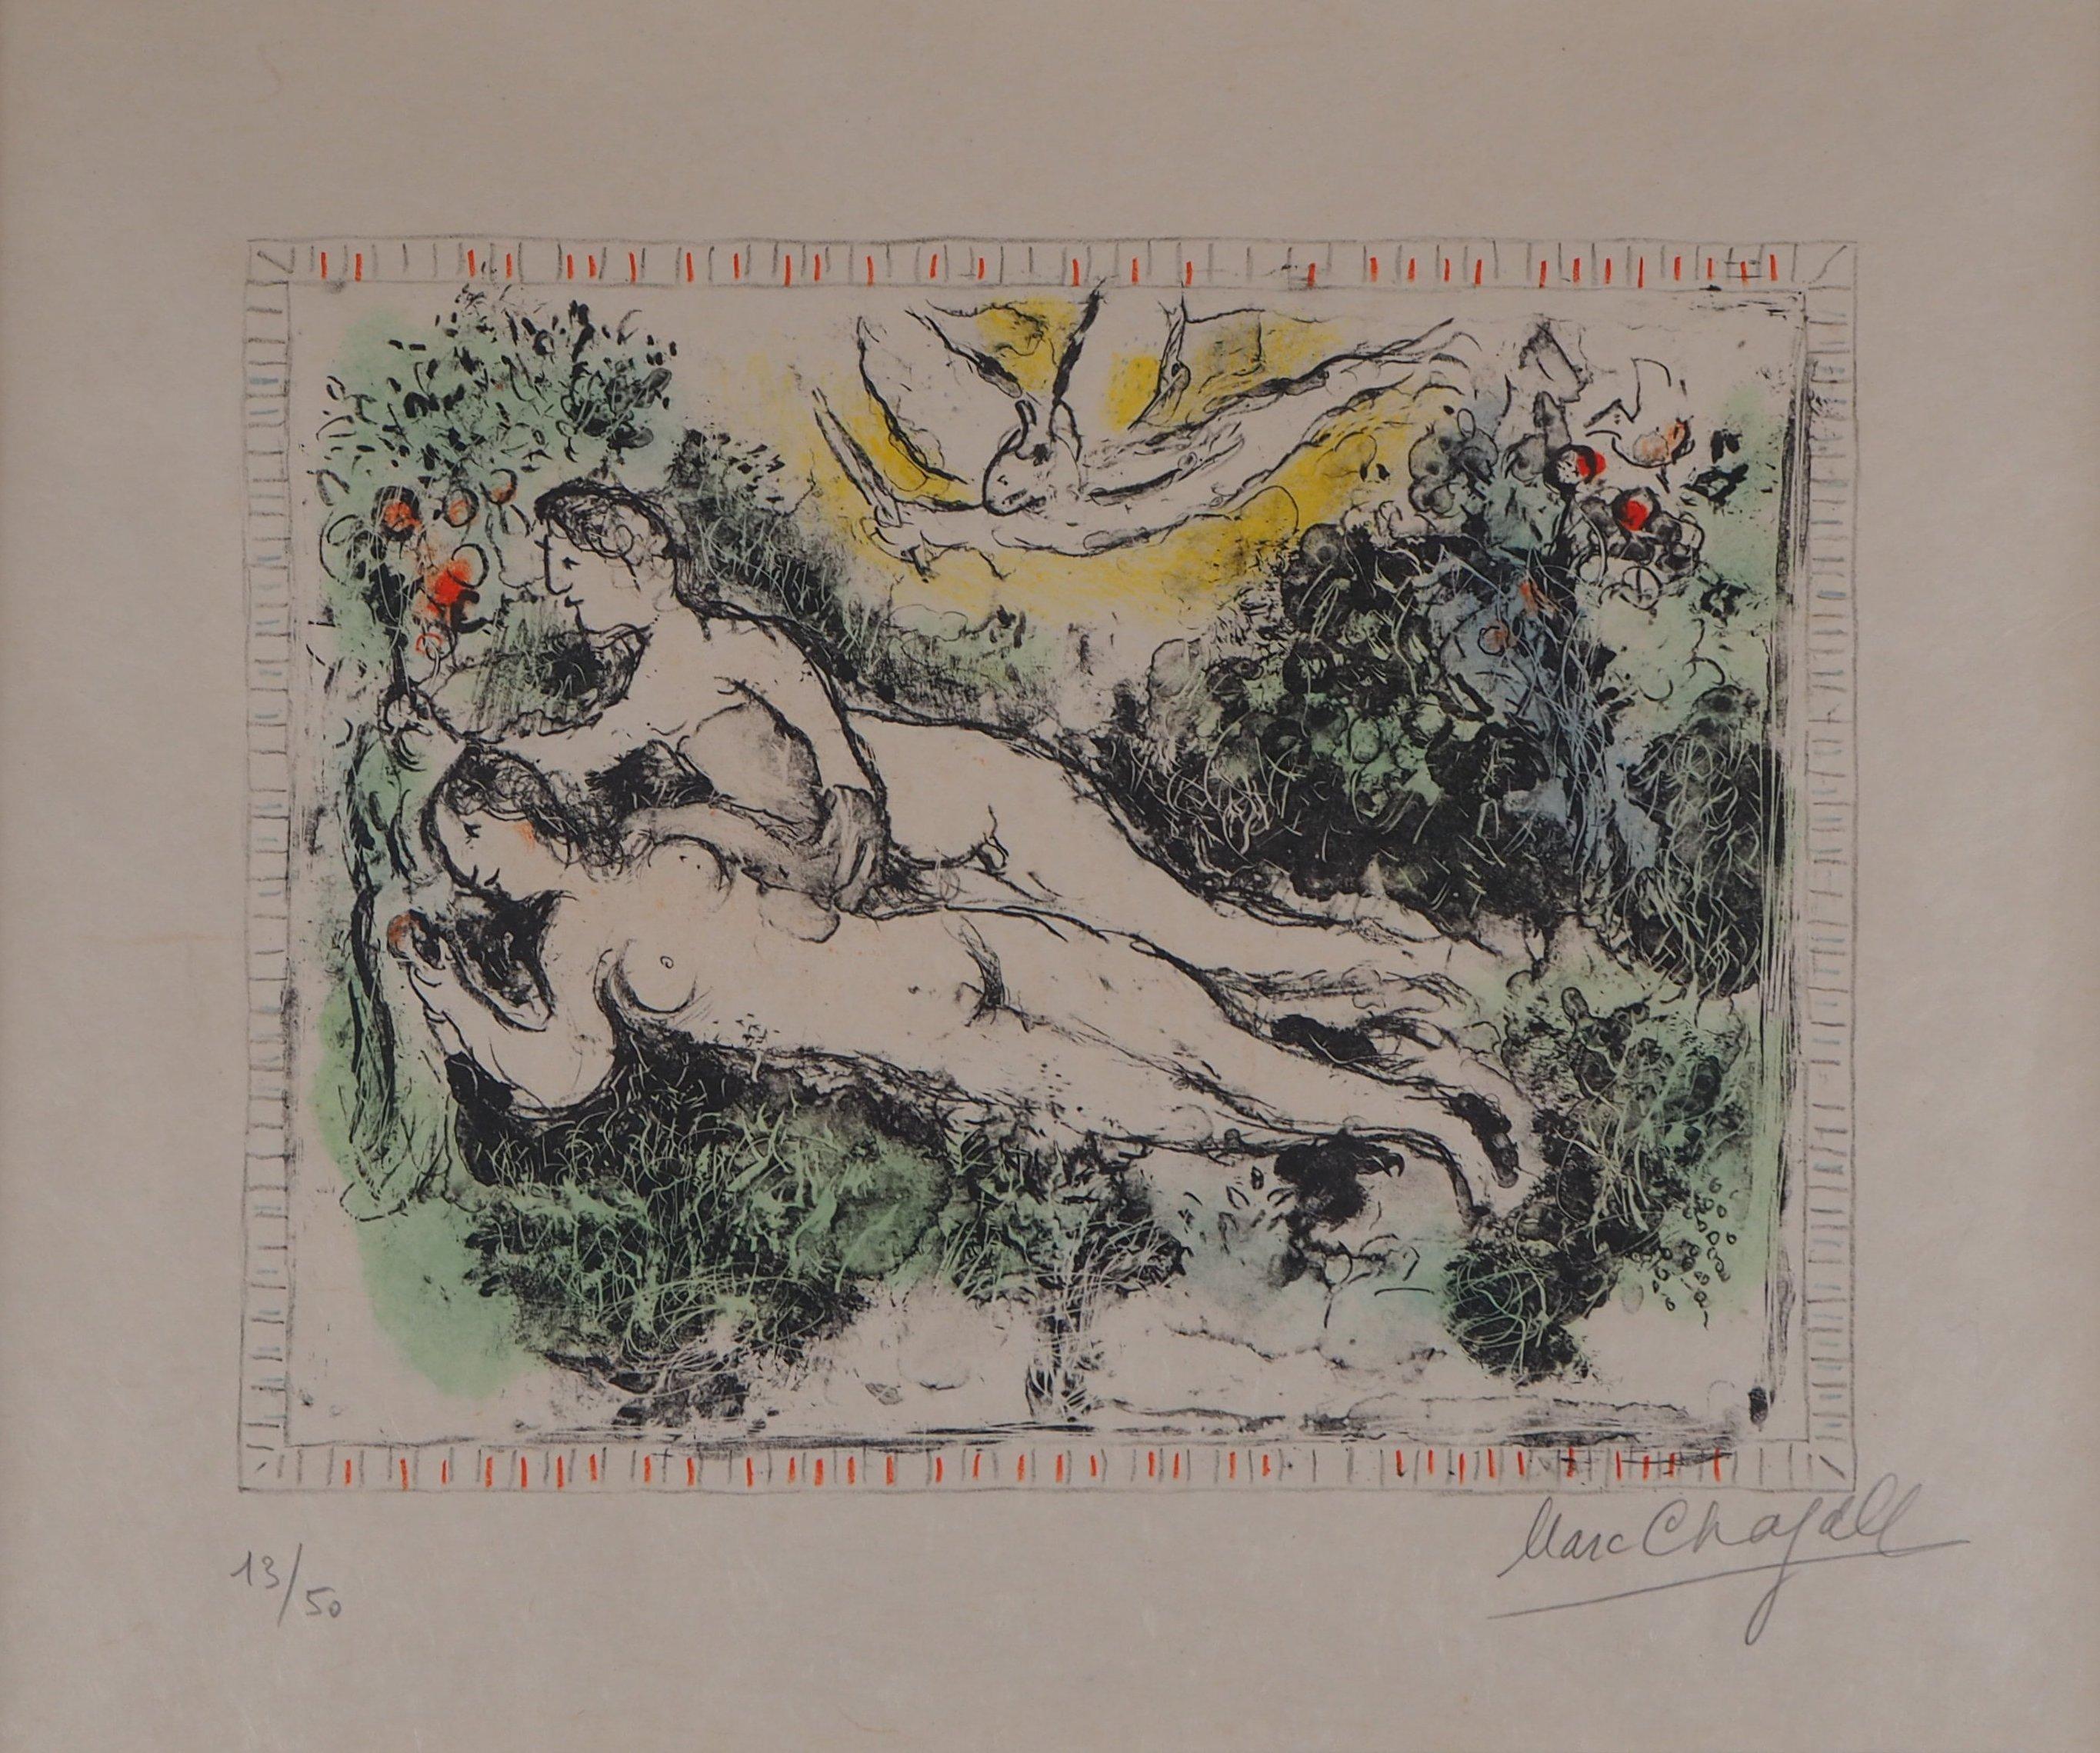 Lovers (Adam and Eve) - Original lithograph, Handsigned & Numbered /50  - Print by Marc Chagall